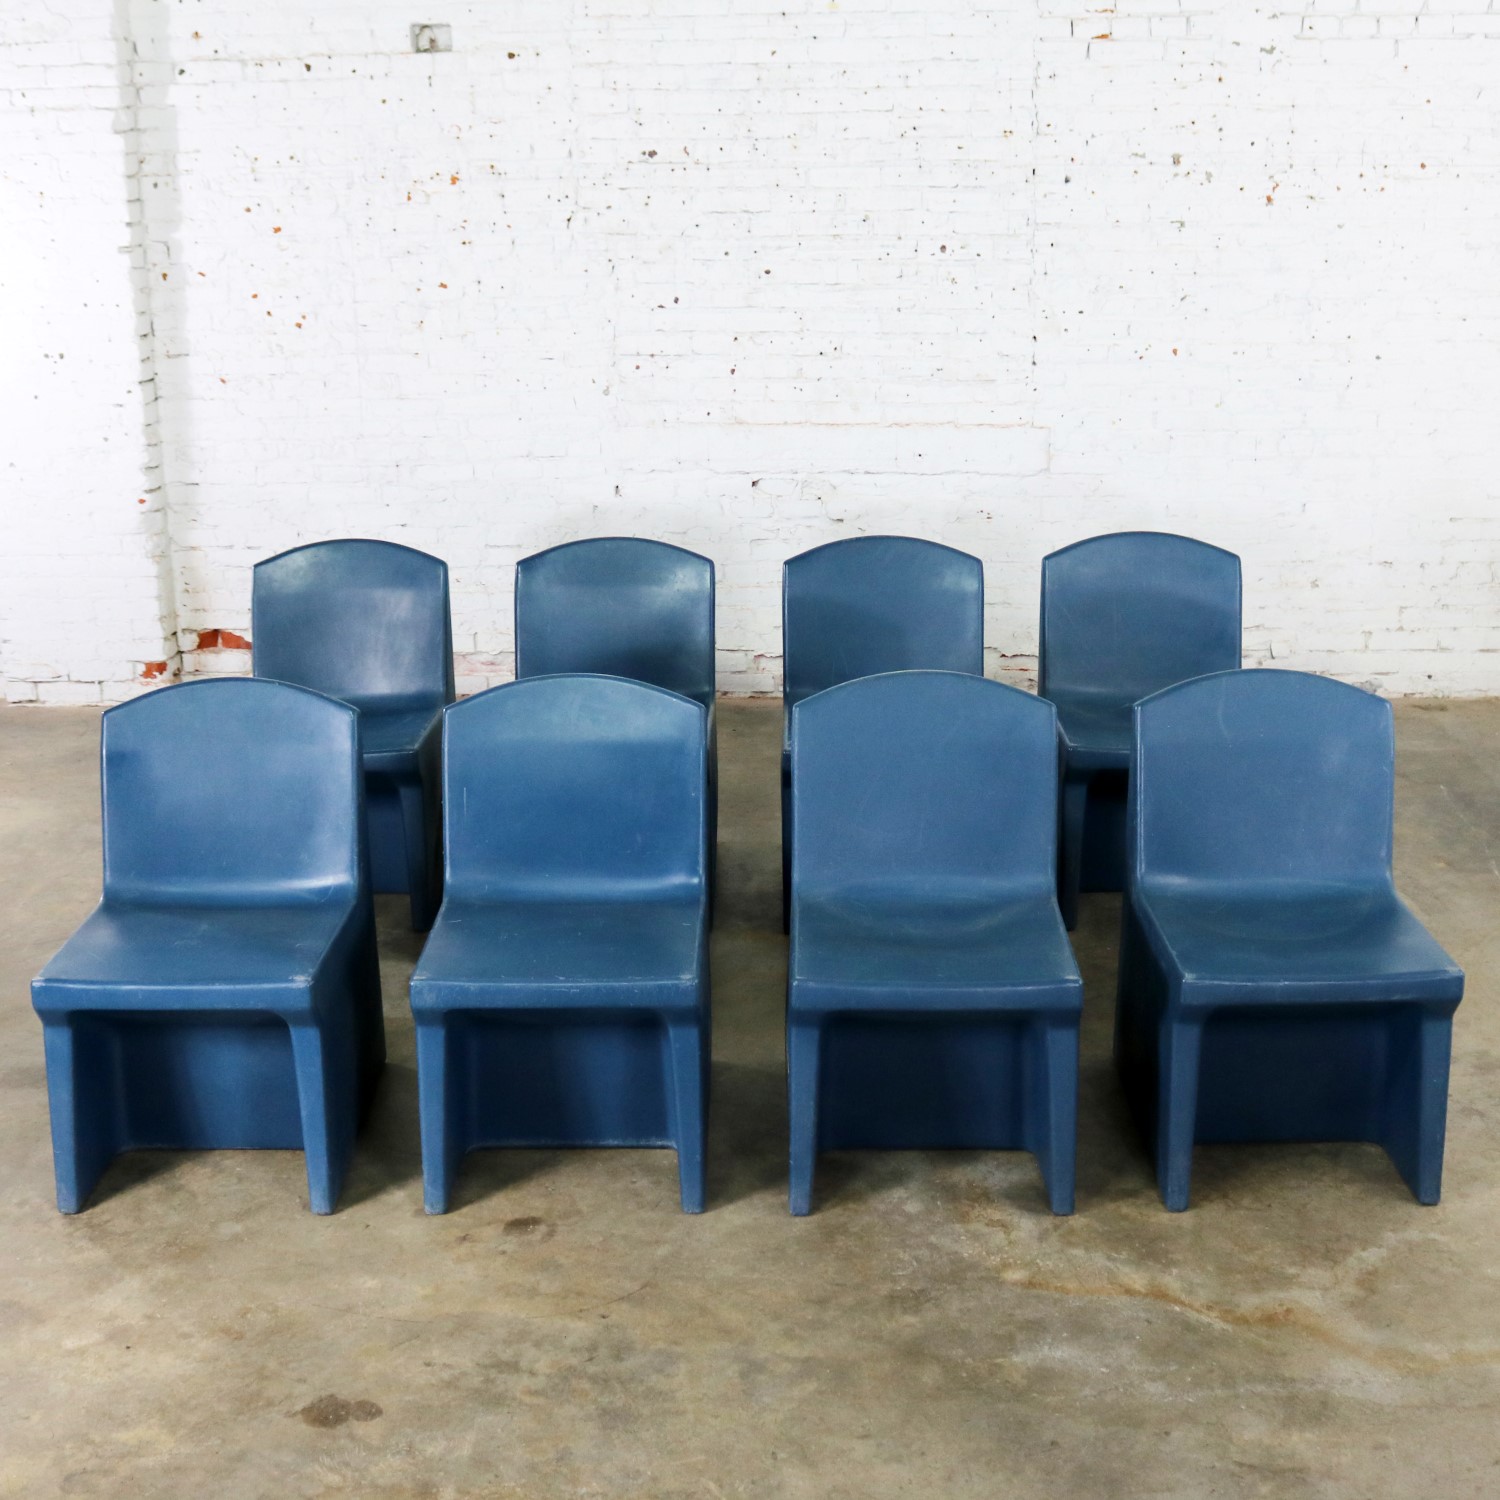 Blue Molded Plastic Side or Slipper Chairs by Norix Set of Eight